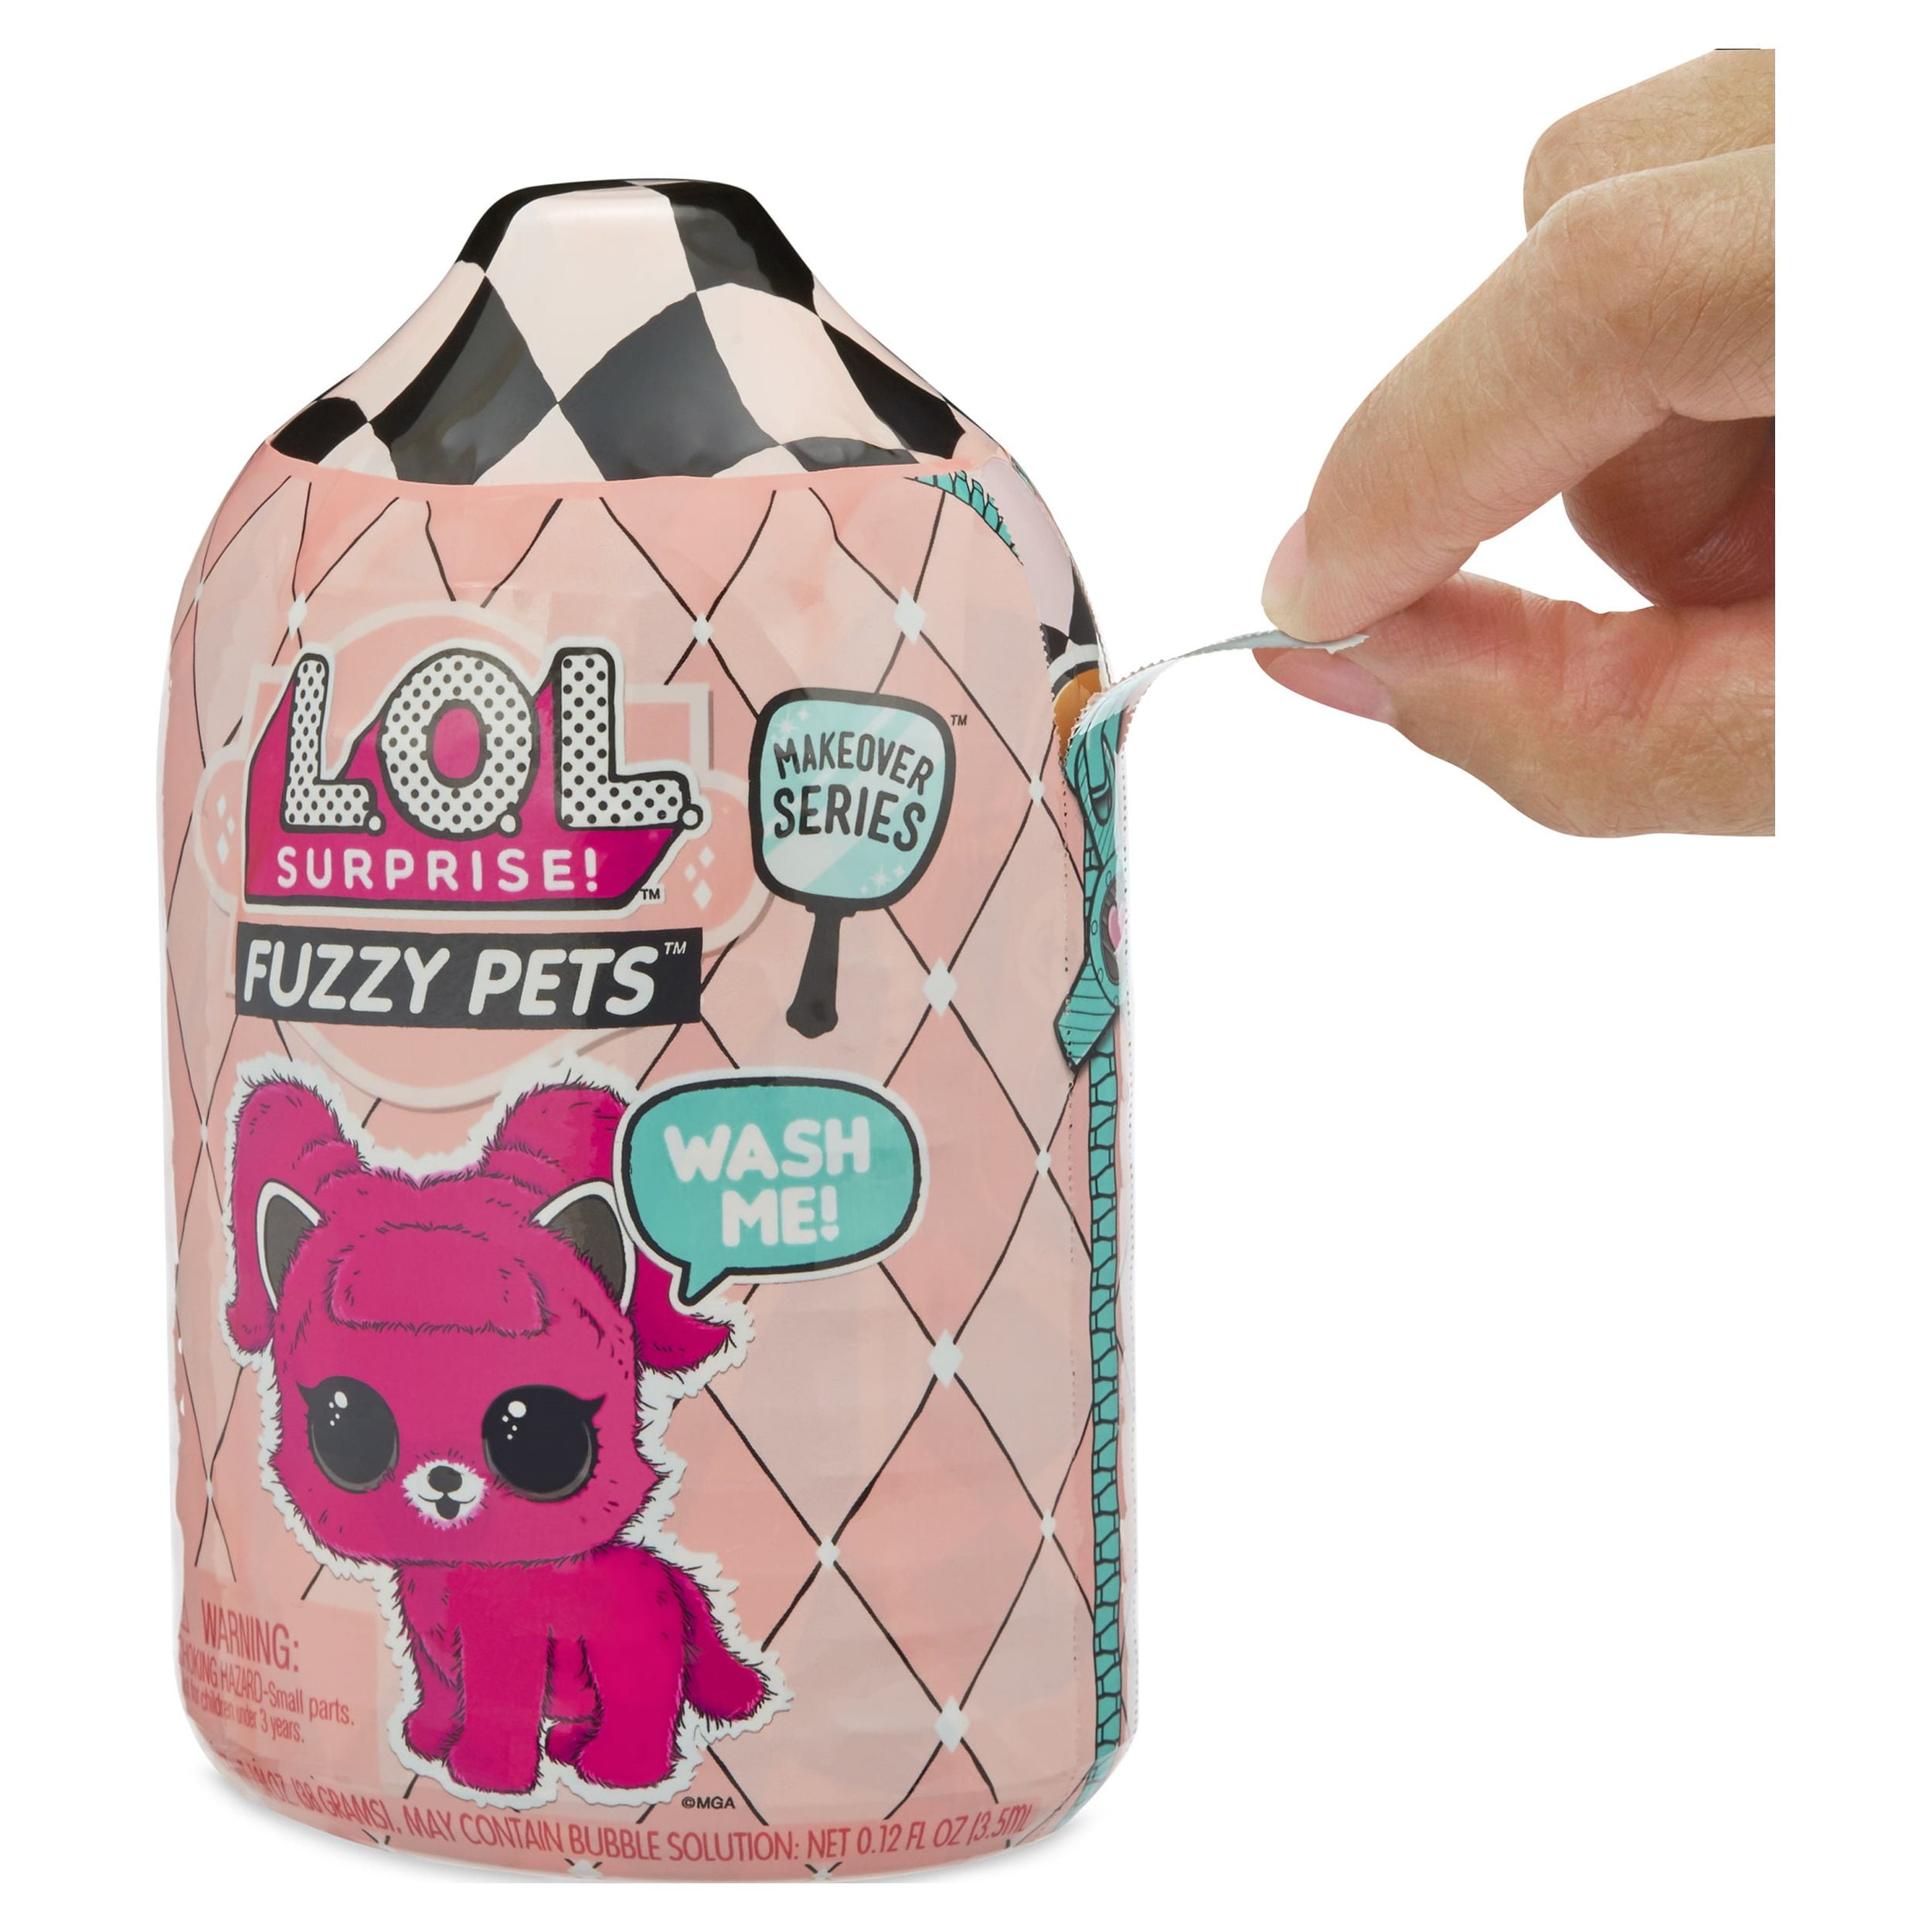 LOL Surprise! Fuzzy Pets with Washable Fuzz Series 2